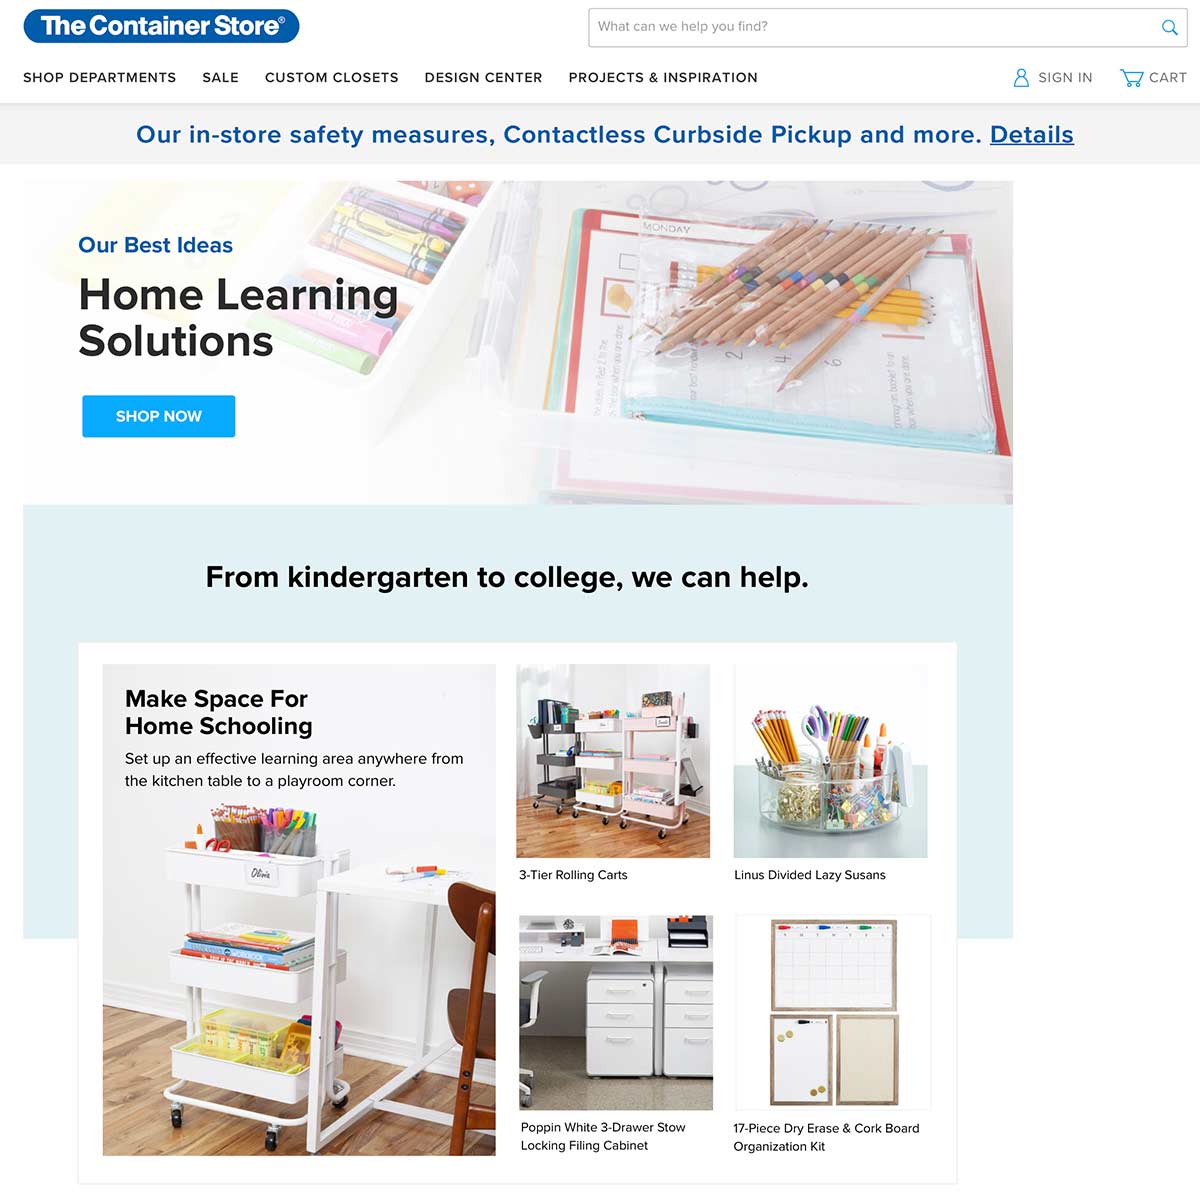 The Container Store landing page for home schooling